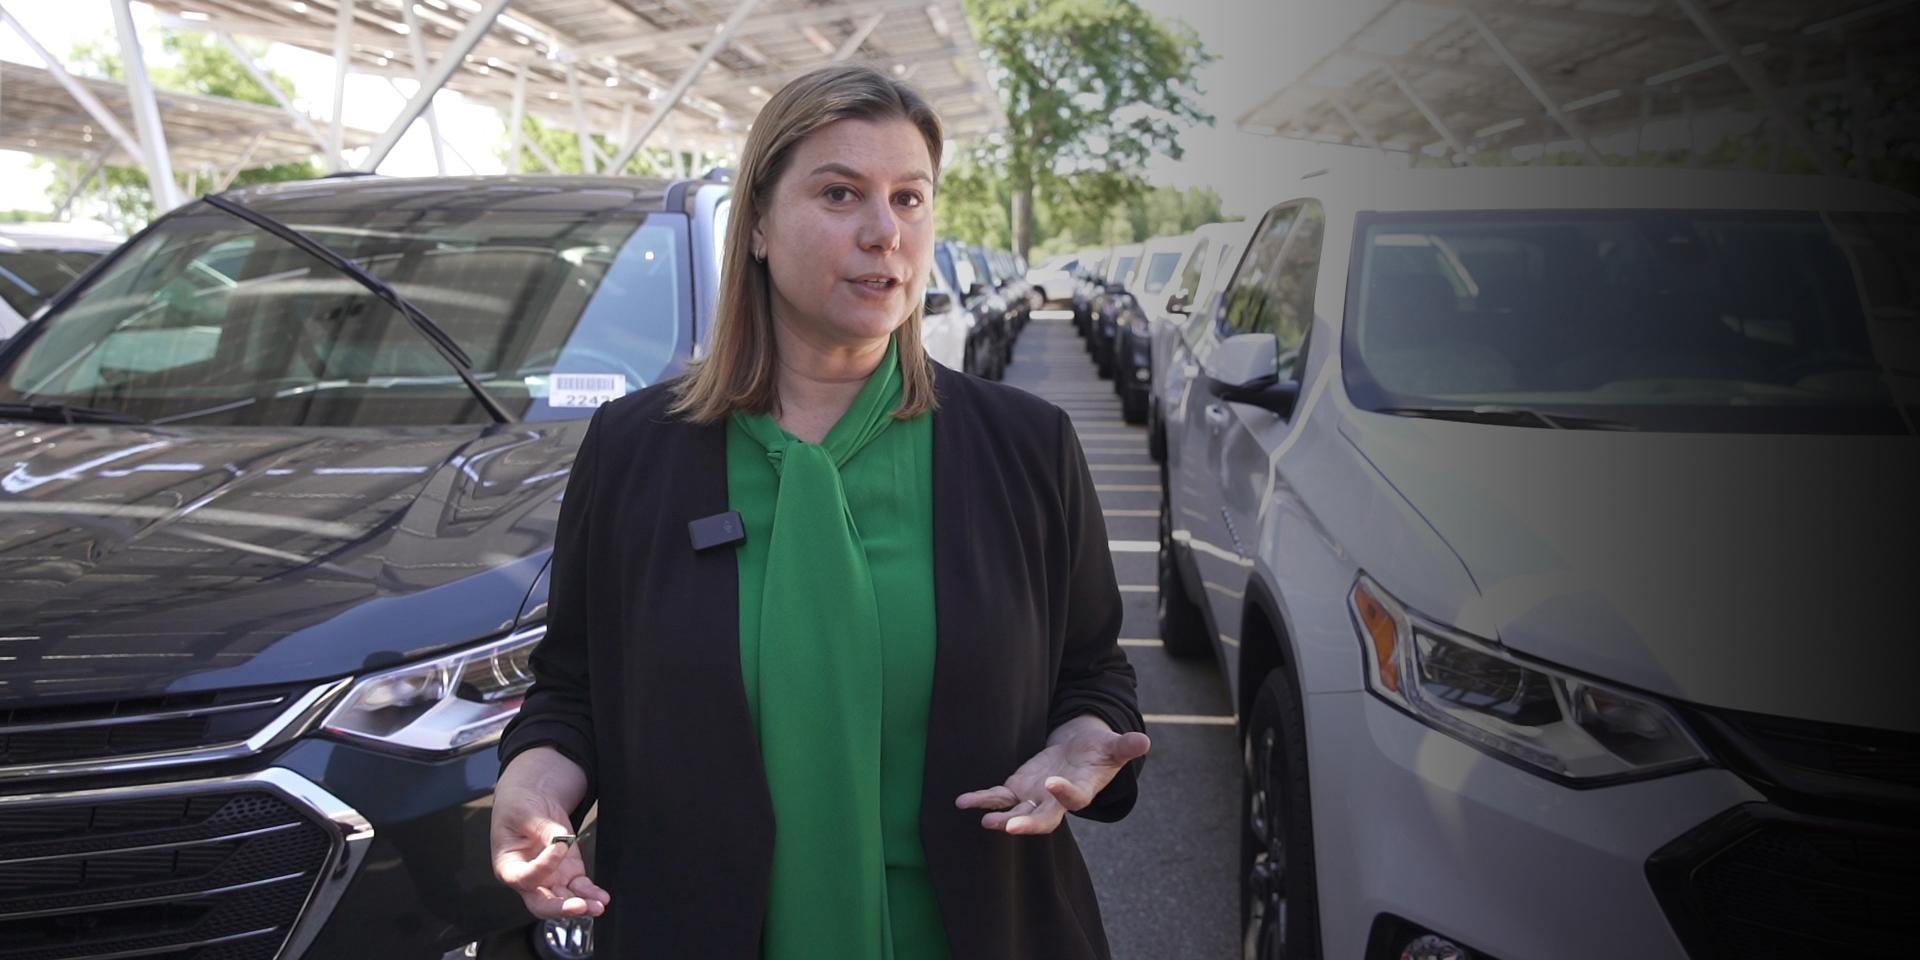 Congresswoman Slotkin discusses the microchip shortage surrounded by thousands of unfinished cars.